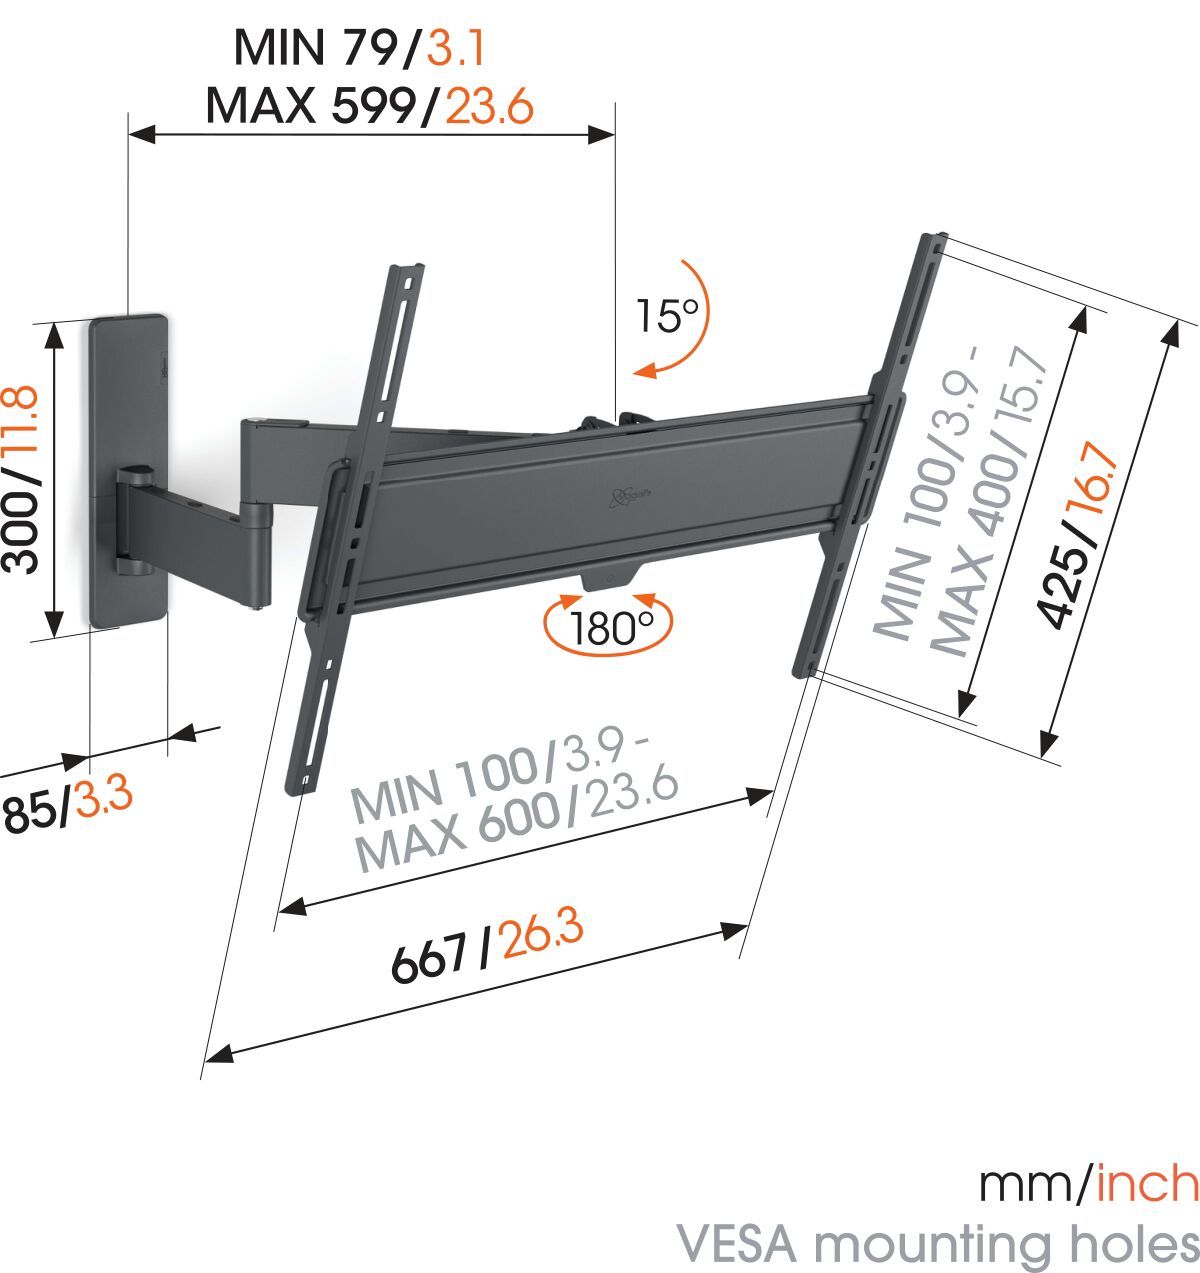 Vogel's TVM 1643 Full-Motion TV Wall Mount - Suitable for 40 up to 77 inch TVs - Full motion (up to 180°) swivel - Tilt up to 15° - Dimensions